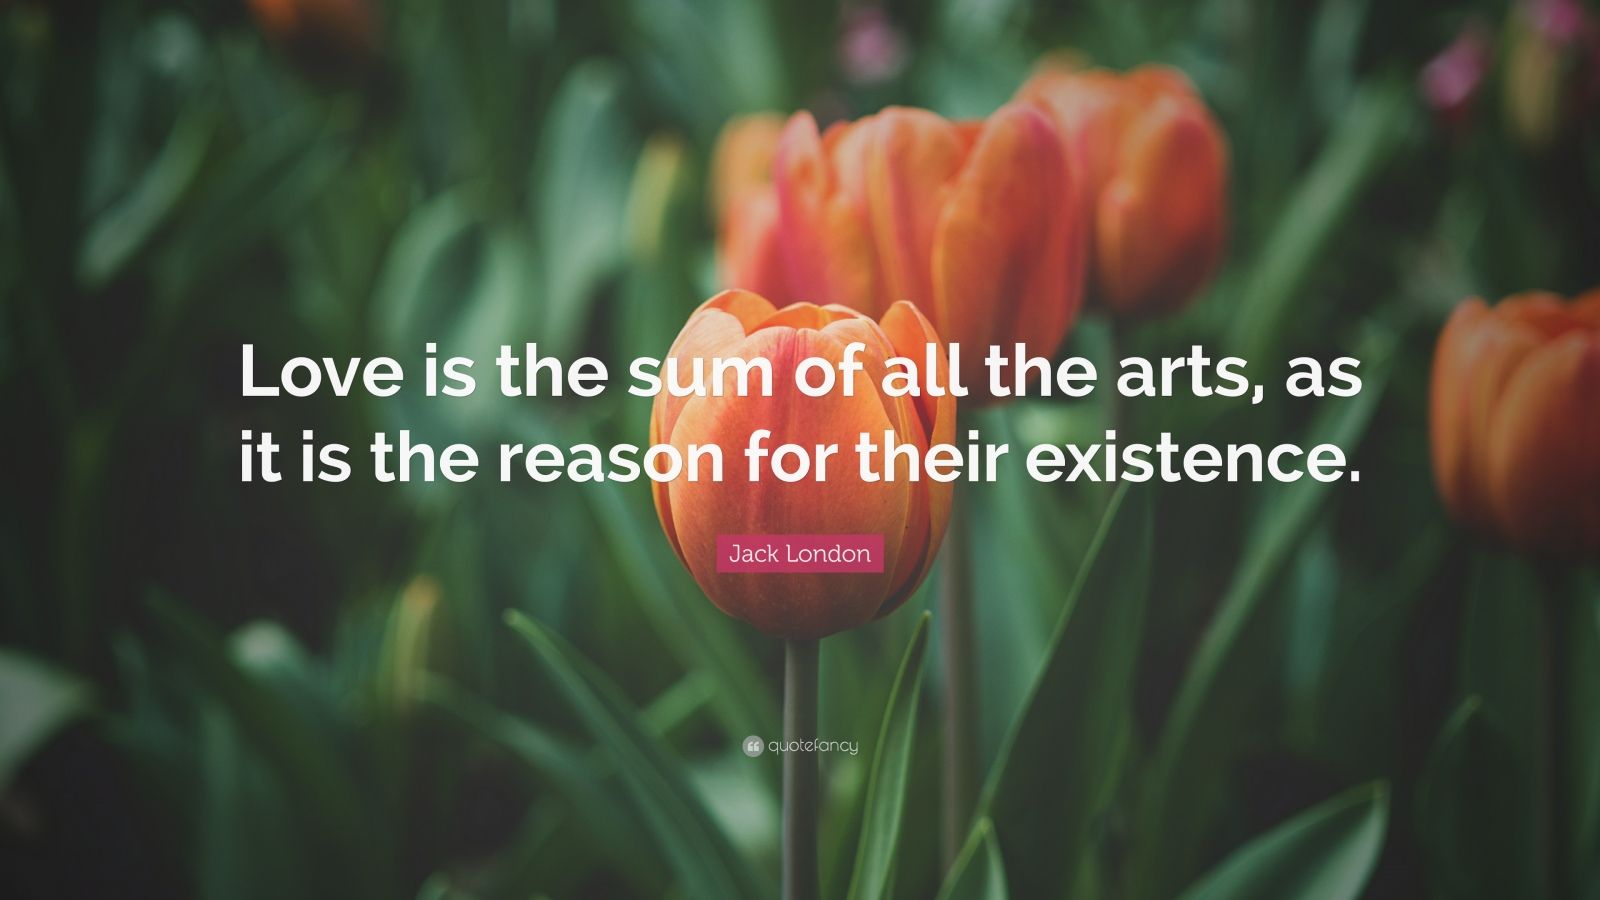 Jack London Quote “Love is the sum of all the arts as it